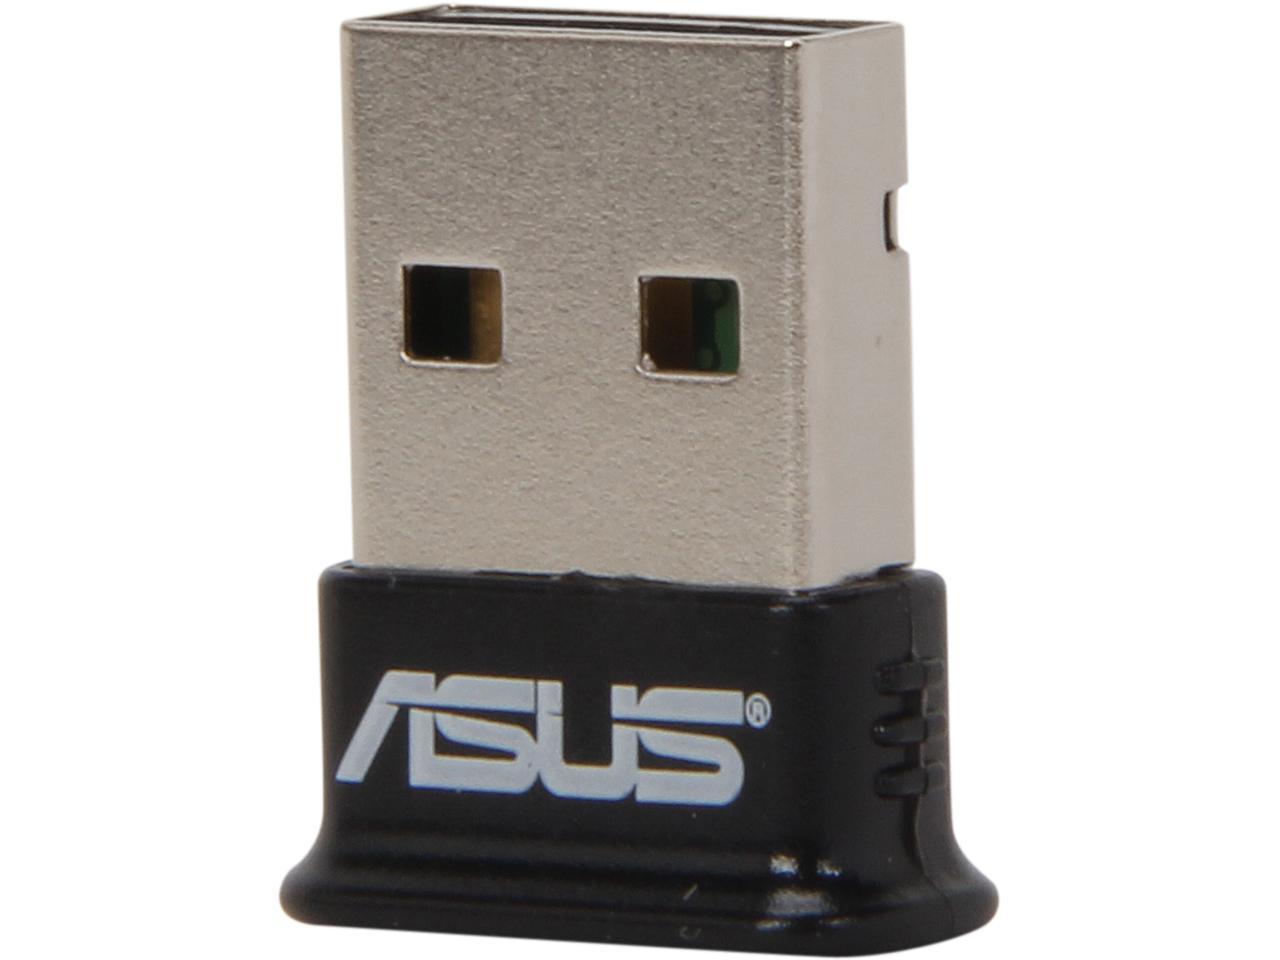 ASUS USB-BT400 USB Adapter w/ Bluetooth Dongle Receiver, Laptop & PC Support, Windows 10 Plug and Play /8/7/XP, Printers, Phones, Headsets, Speakers, Keyboards, Controllers - image 1 of 6